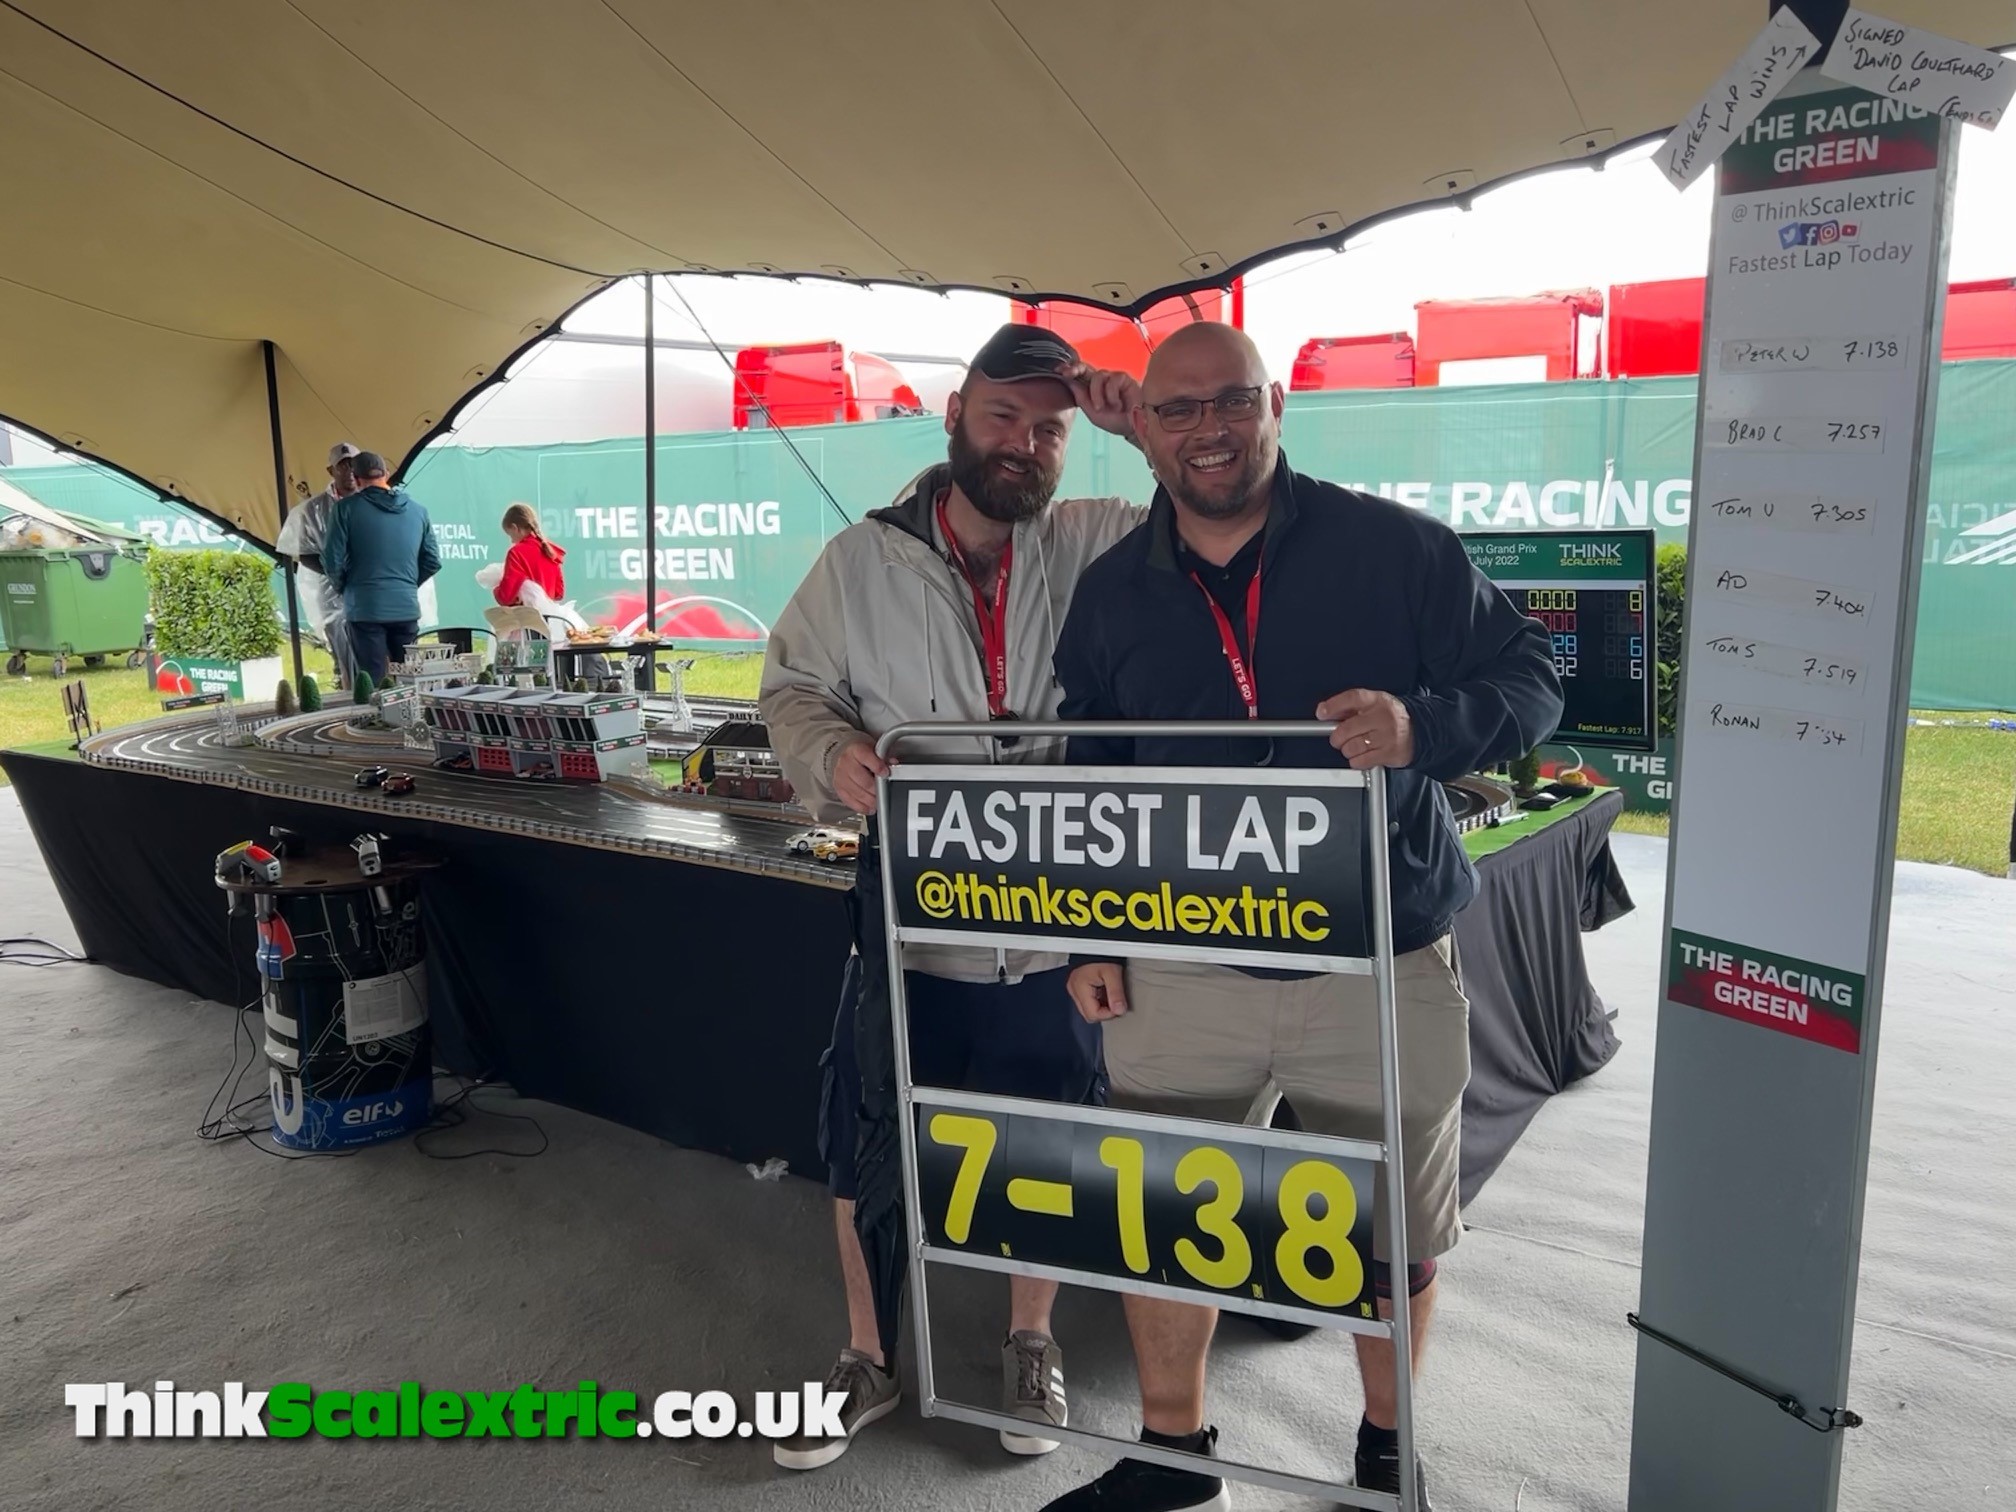 Silverstone British Grand Prix 2022 The Racing Green Hospitality Scalextric Hire